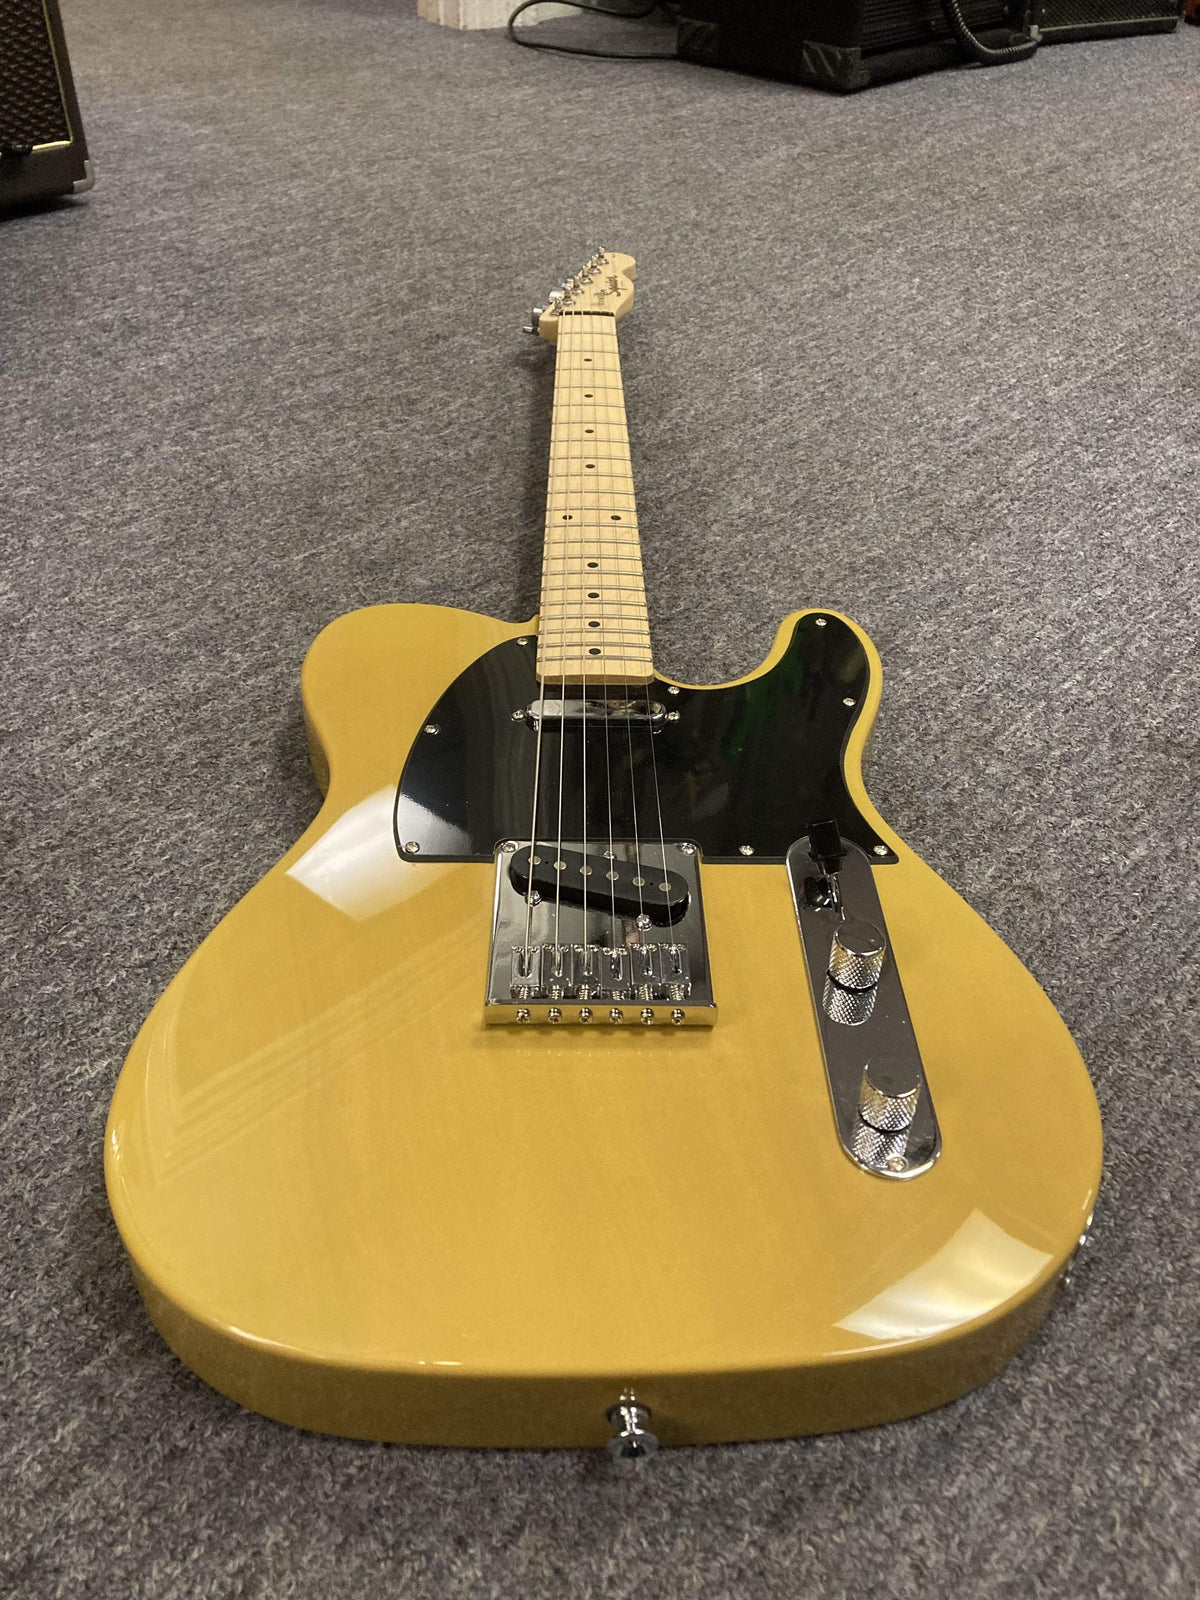 Squier Affinity Telecaster BSB Electric Guitar (refurbished)